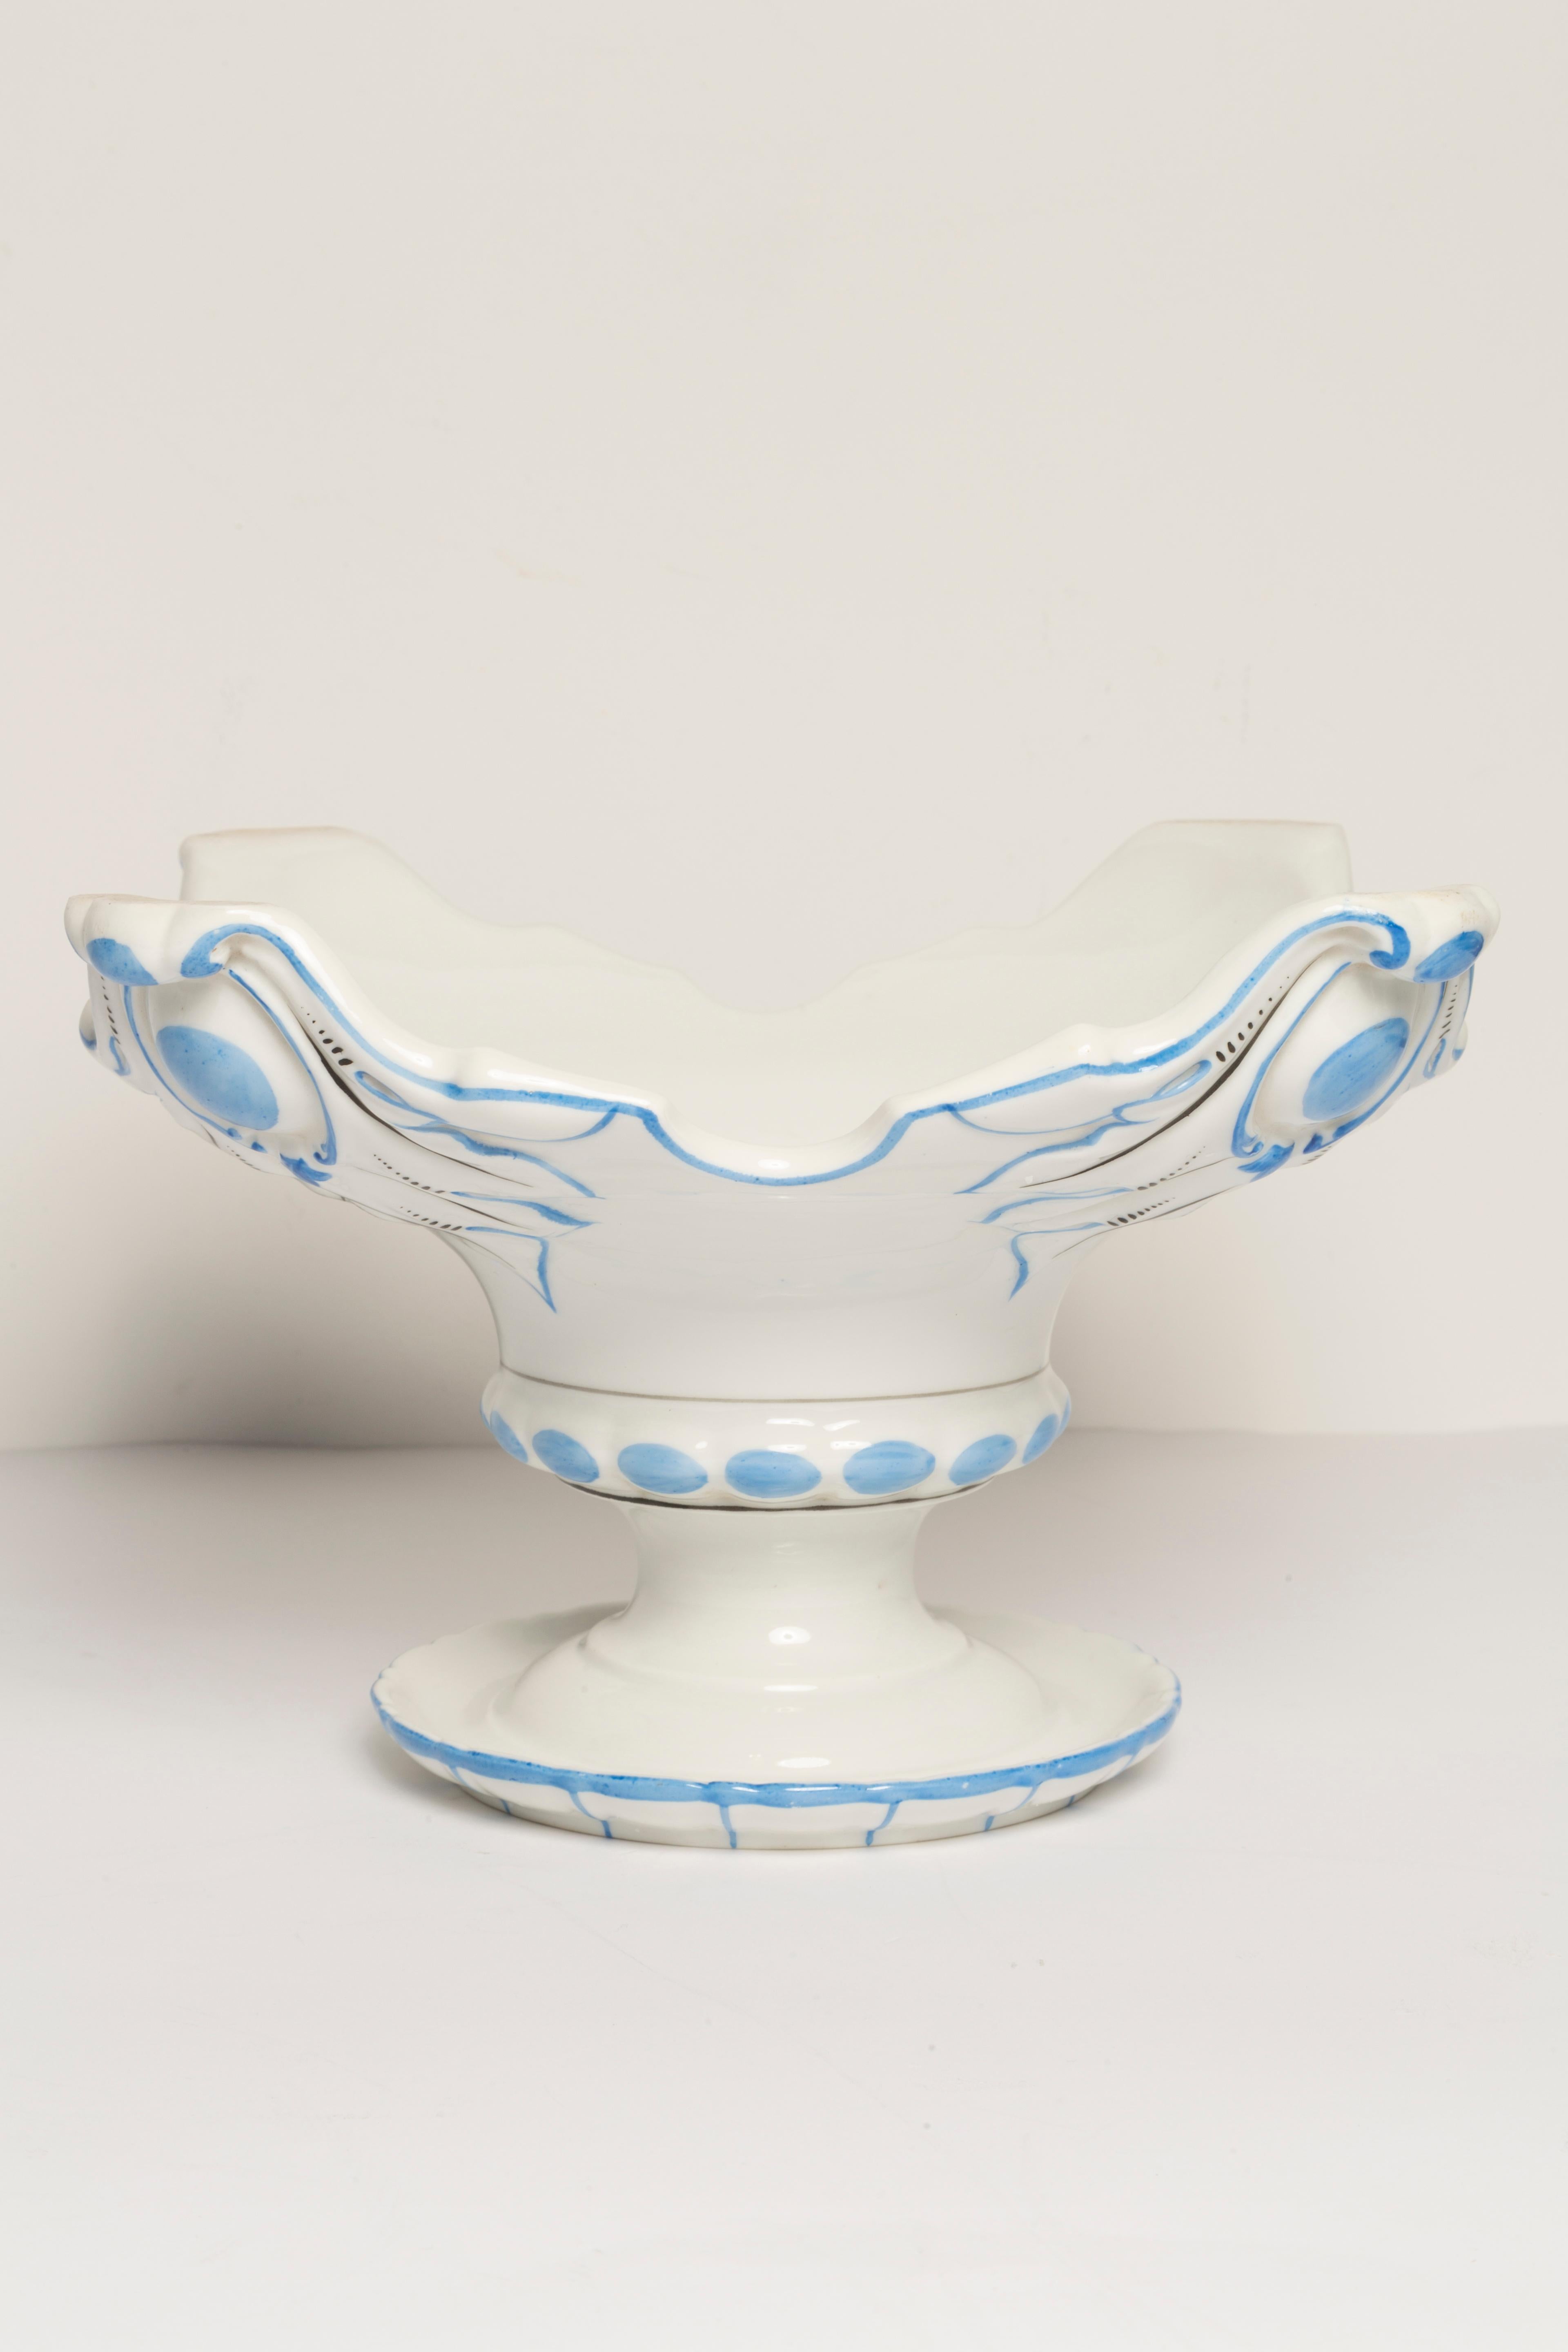 20th Century Ceramic White and Blue Candlestick, France, 1960s For Sale 5